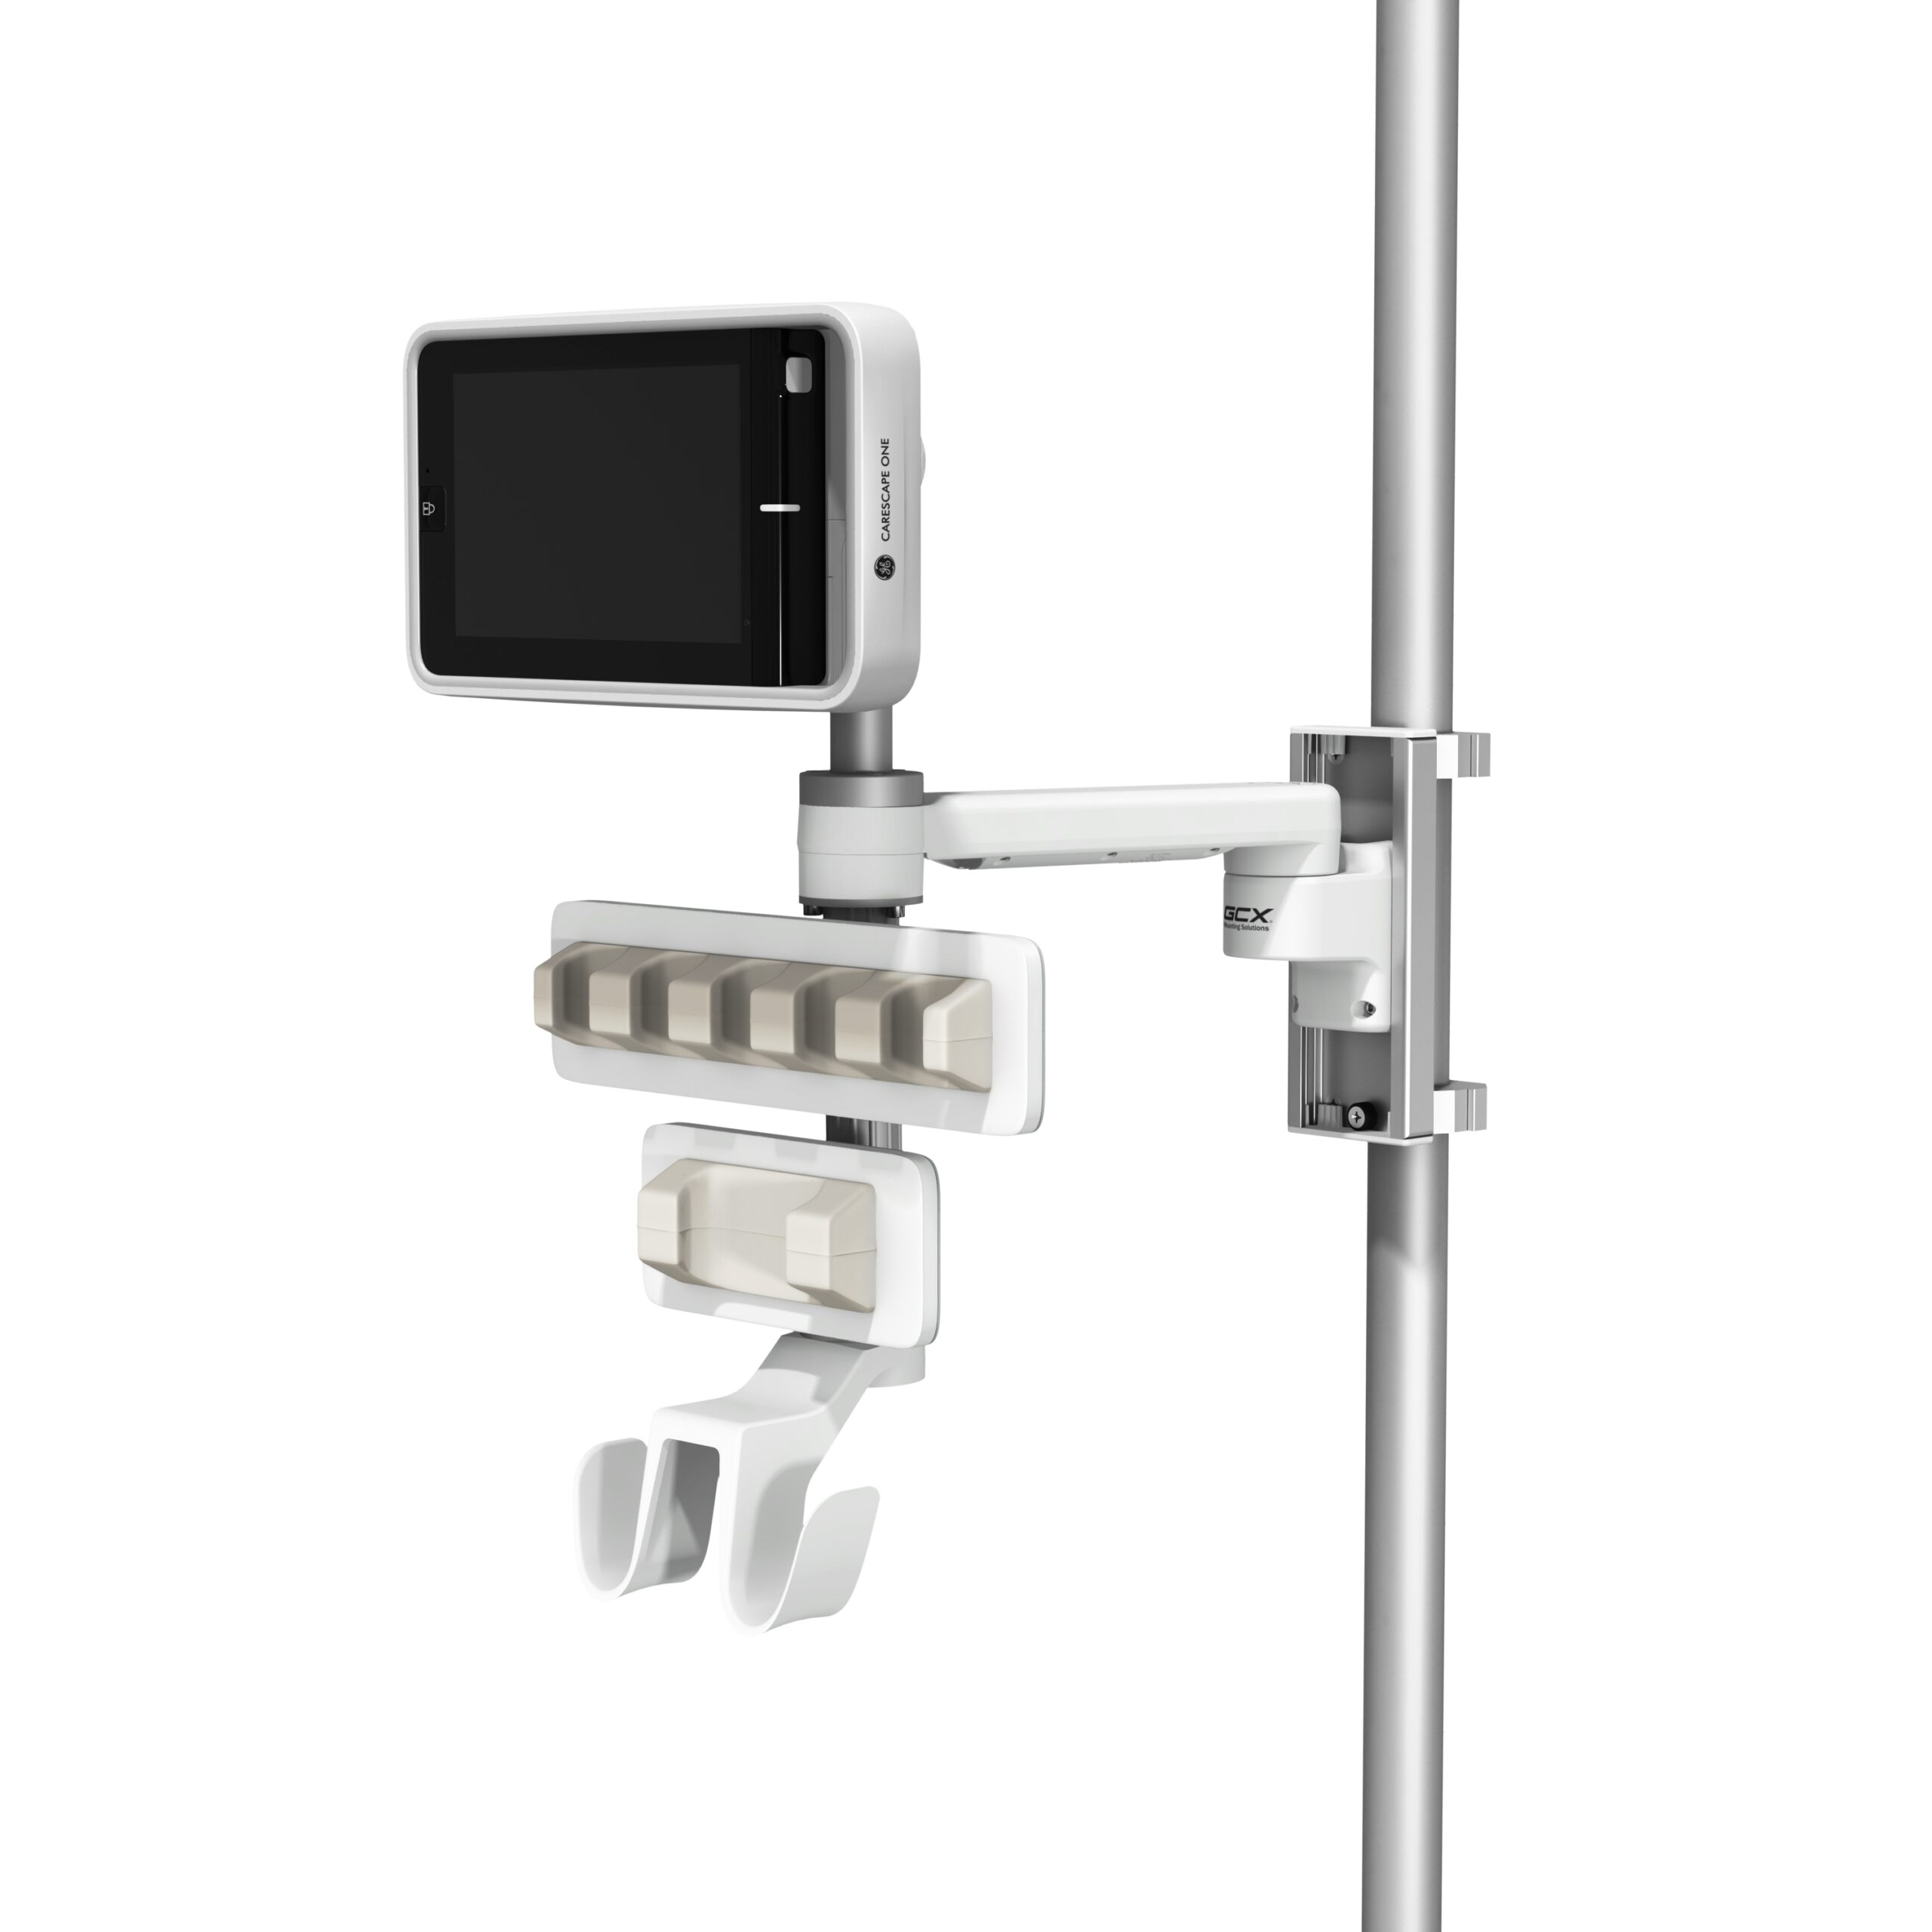 CARESCAPE ONE with Dual Active Probe Holders on 38 mm Post